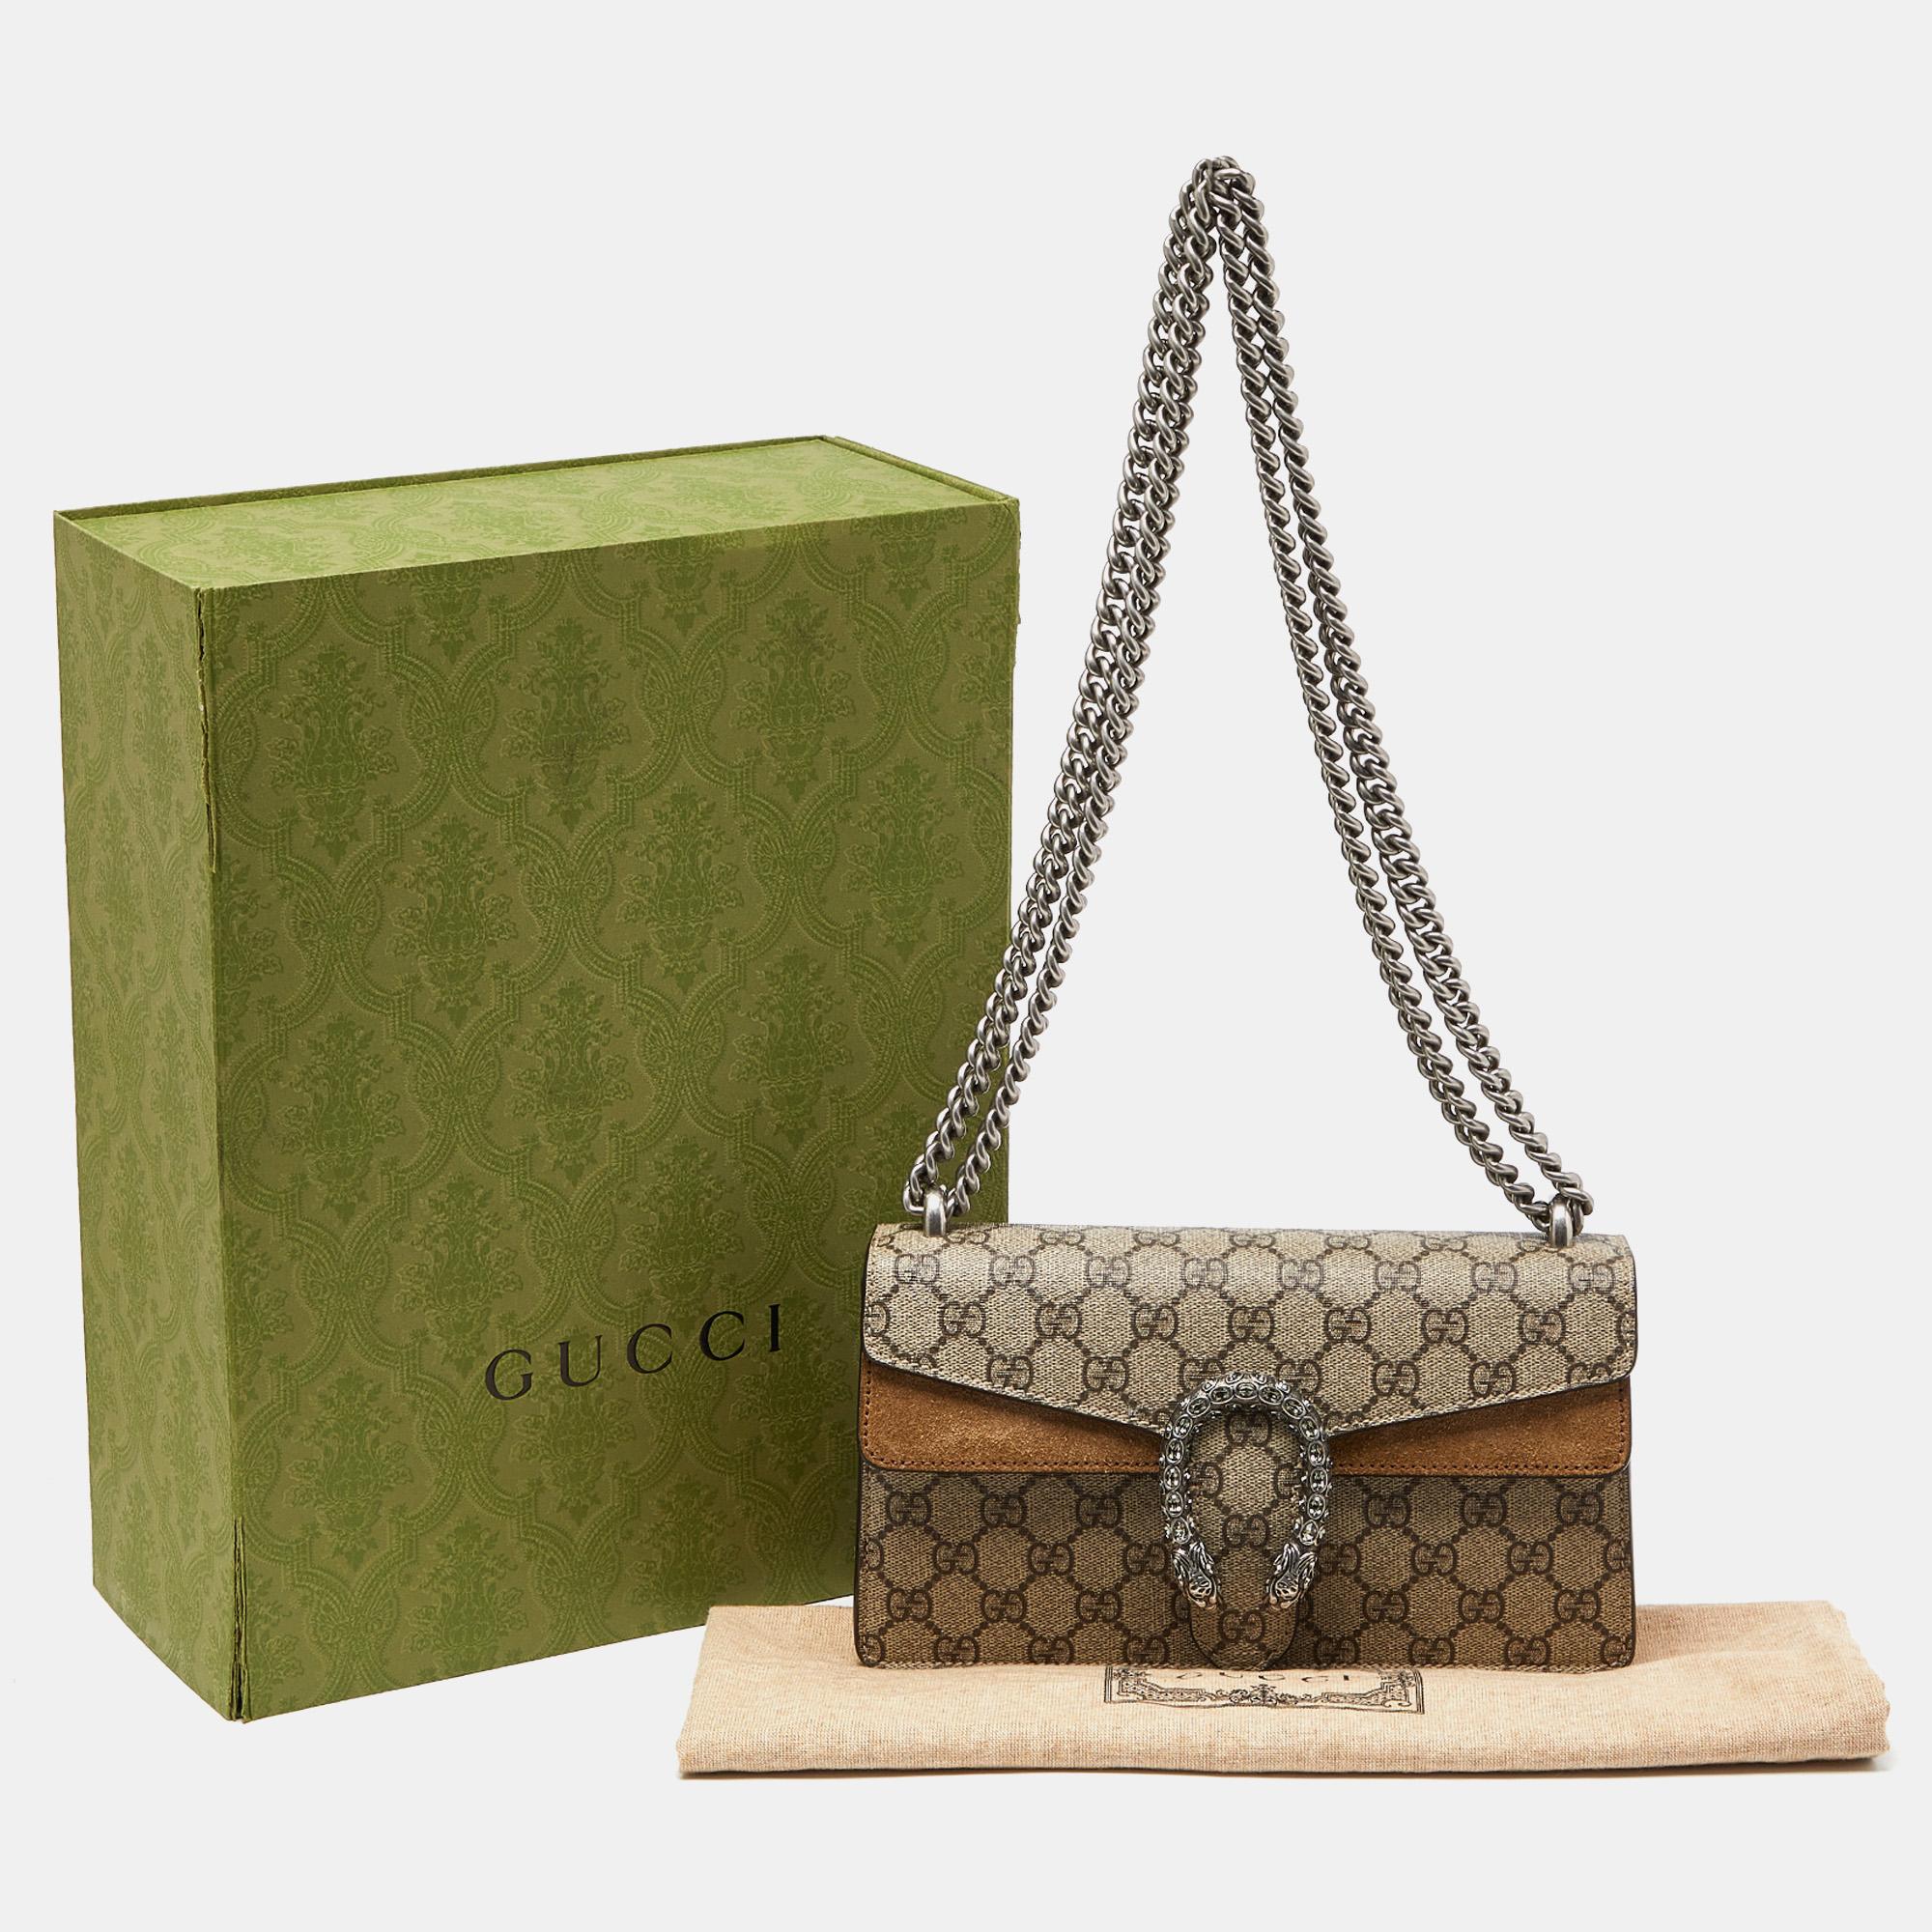 Gucci Beige GG Supreme Canvas and Suede Small Rectangular Dionysus Shoulder Bag For Sale 5